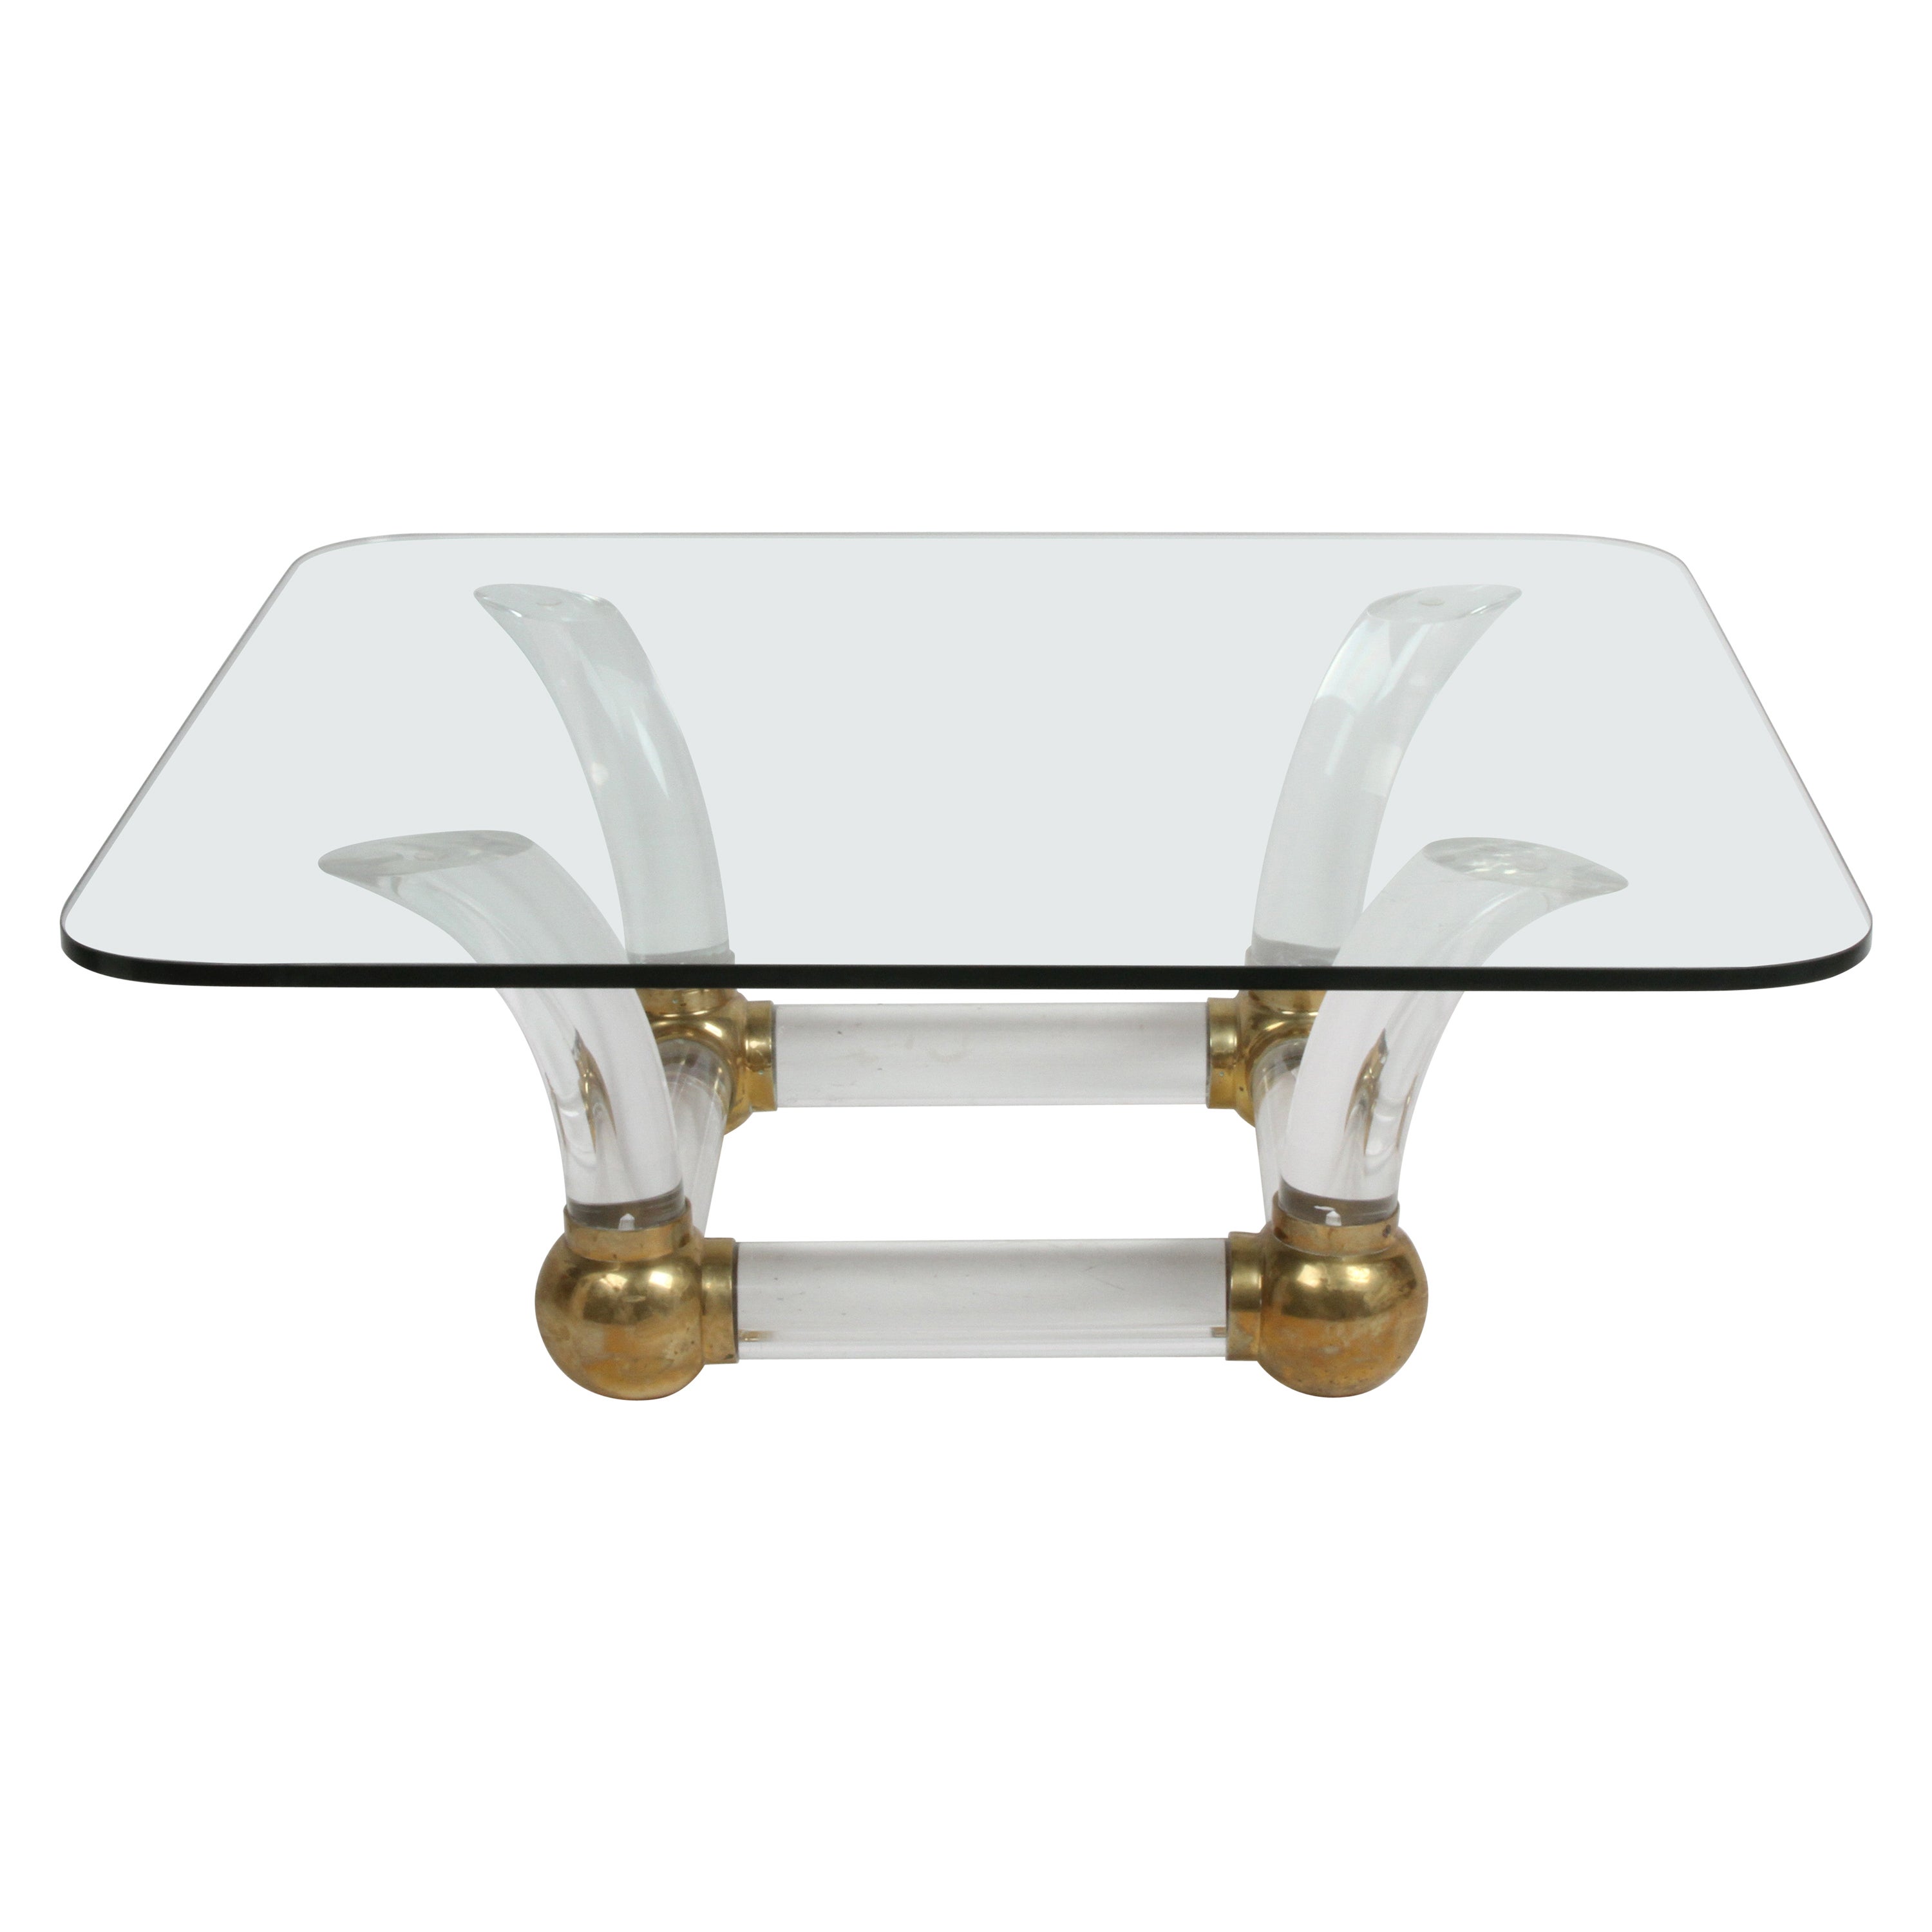 1970s Hollywood Regency Lucite Tusk & Brass Ball Springer Style Coffee Table